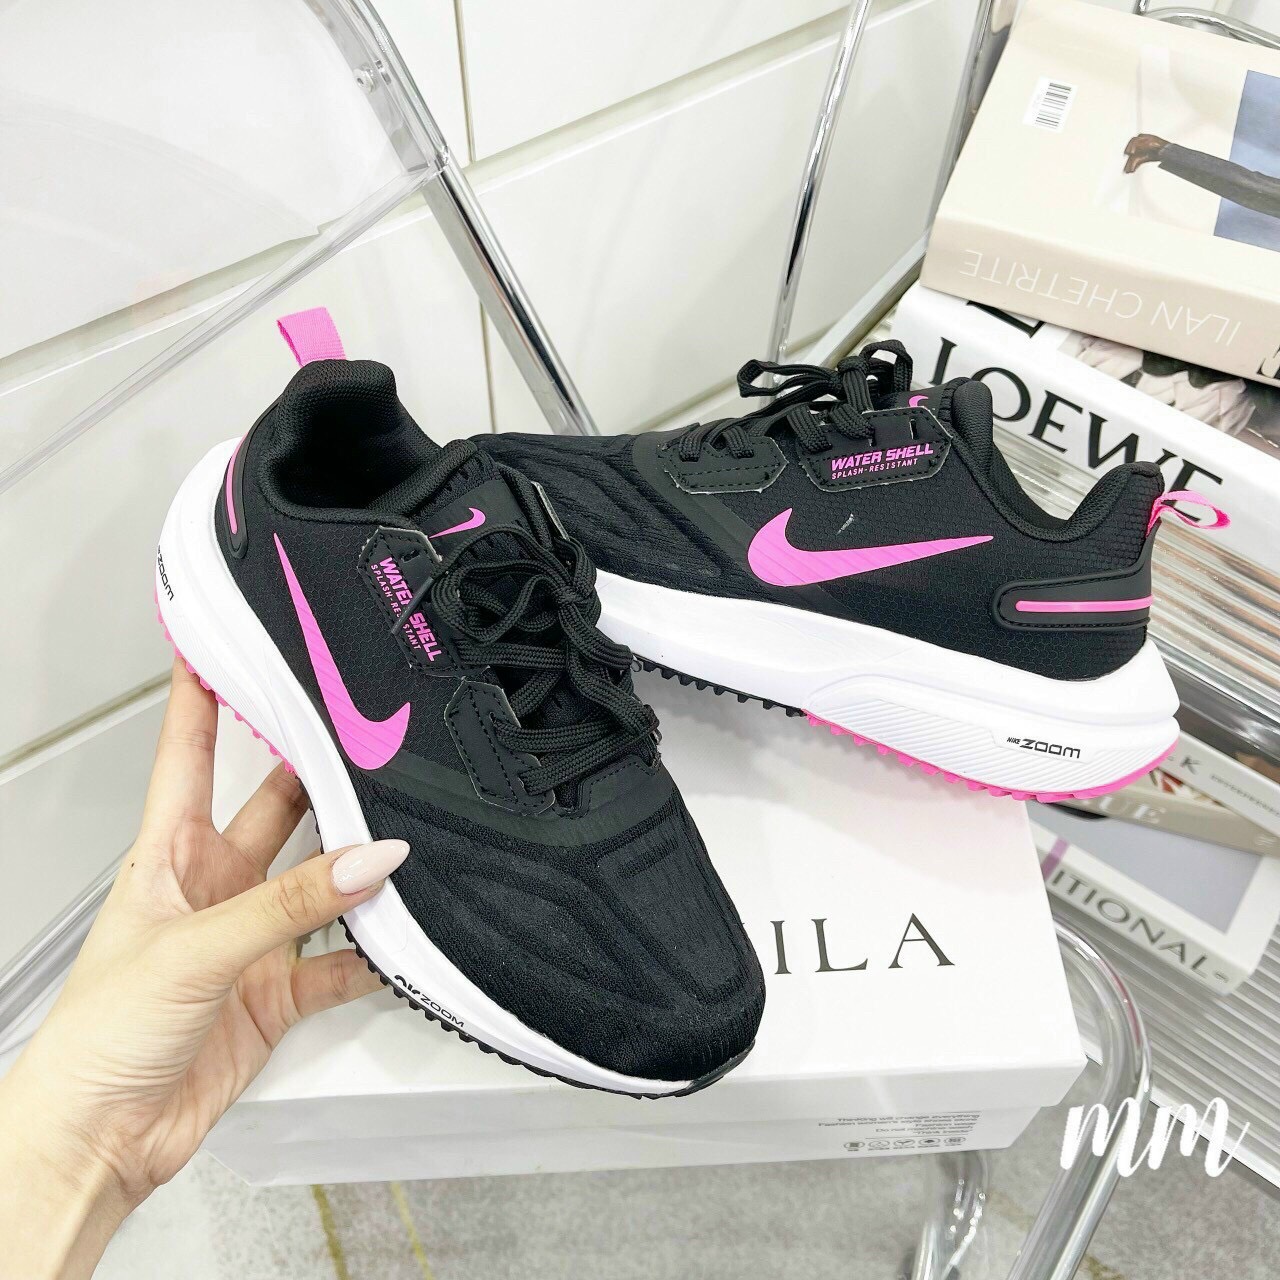 Giày Nike Zoom Water Shell Đen Rep 1:1